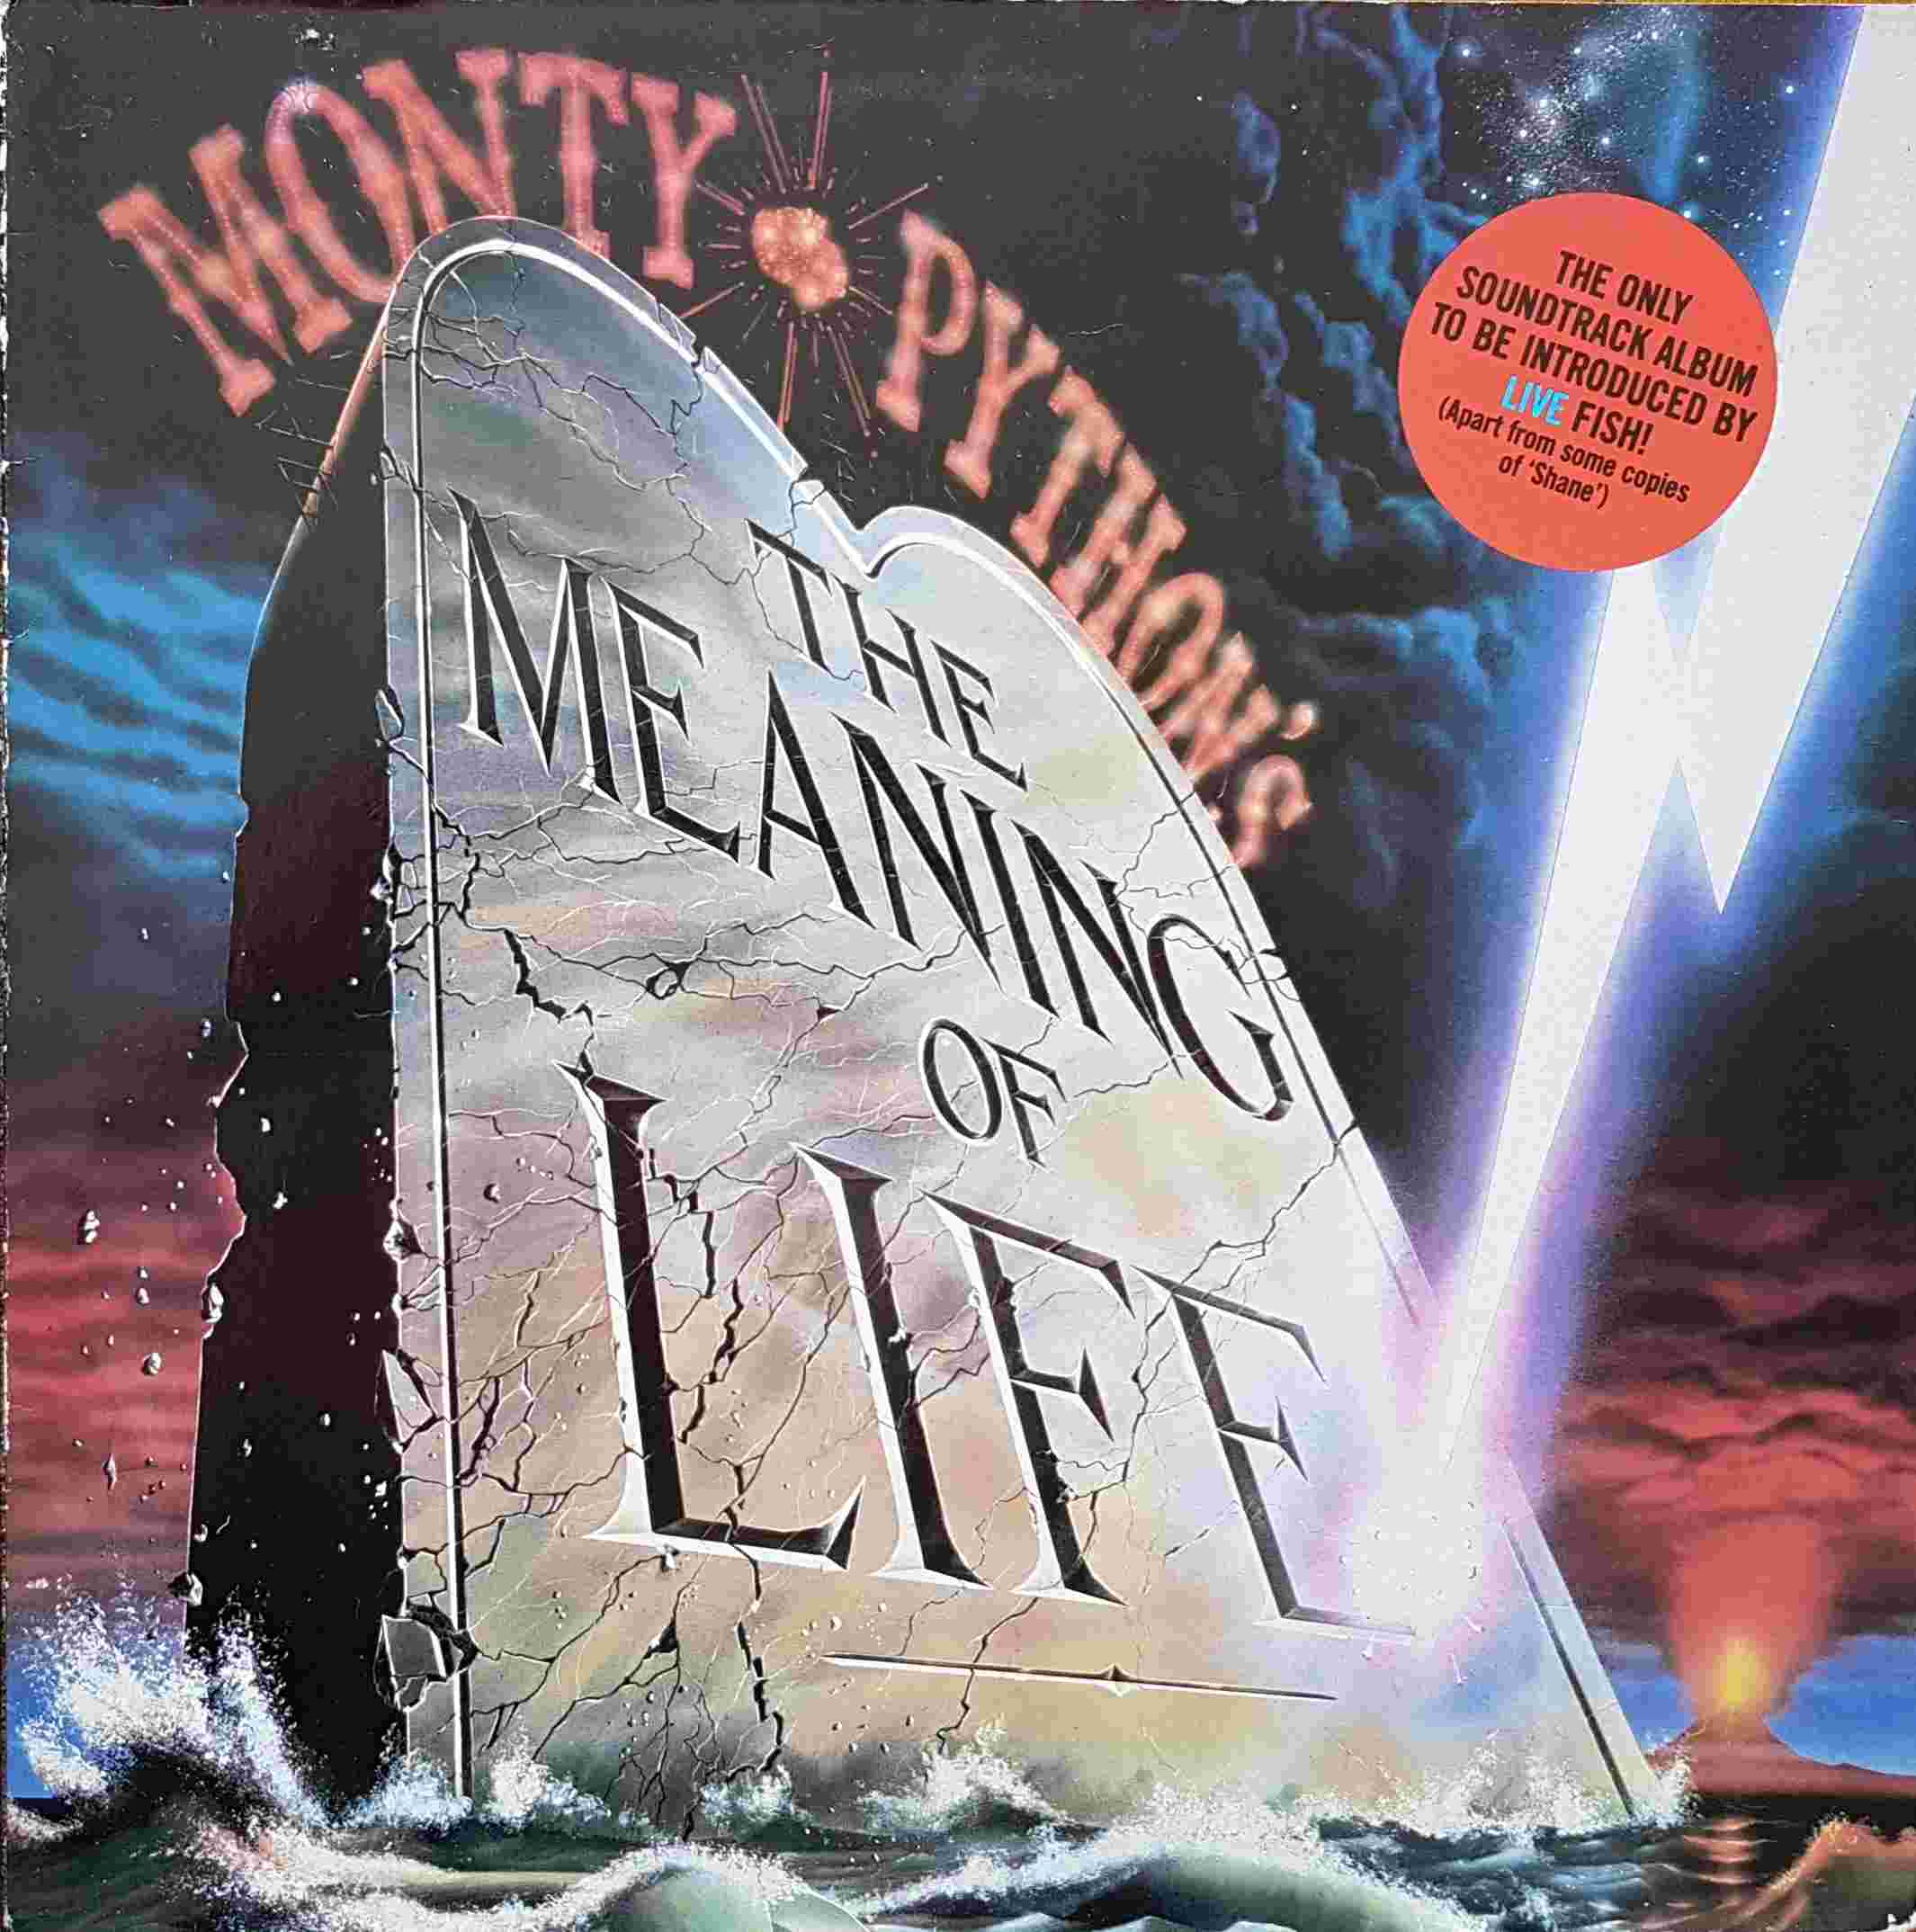 Picture of CBS 70239 The meaning of life - Monty Python's flying circus by artist Monty Python from the BBC albums - Records and Tapes library